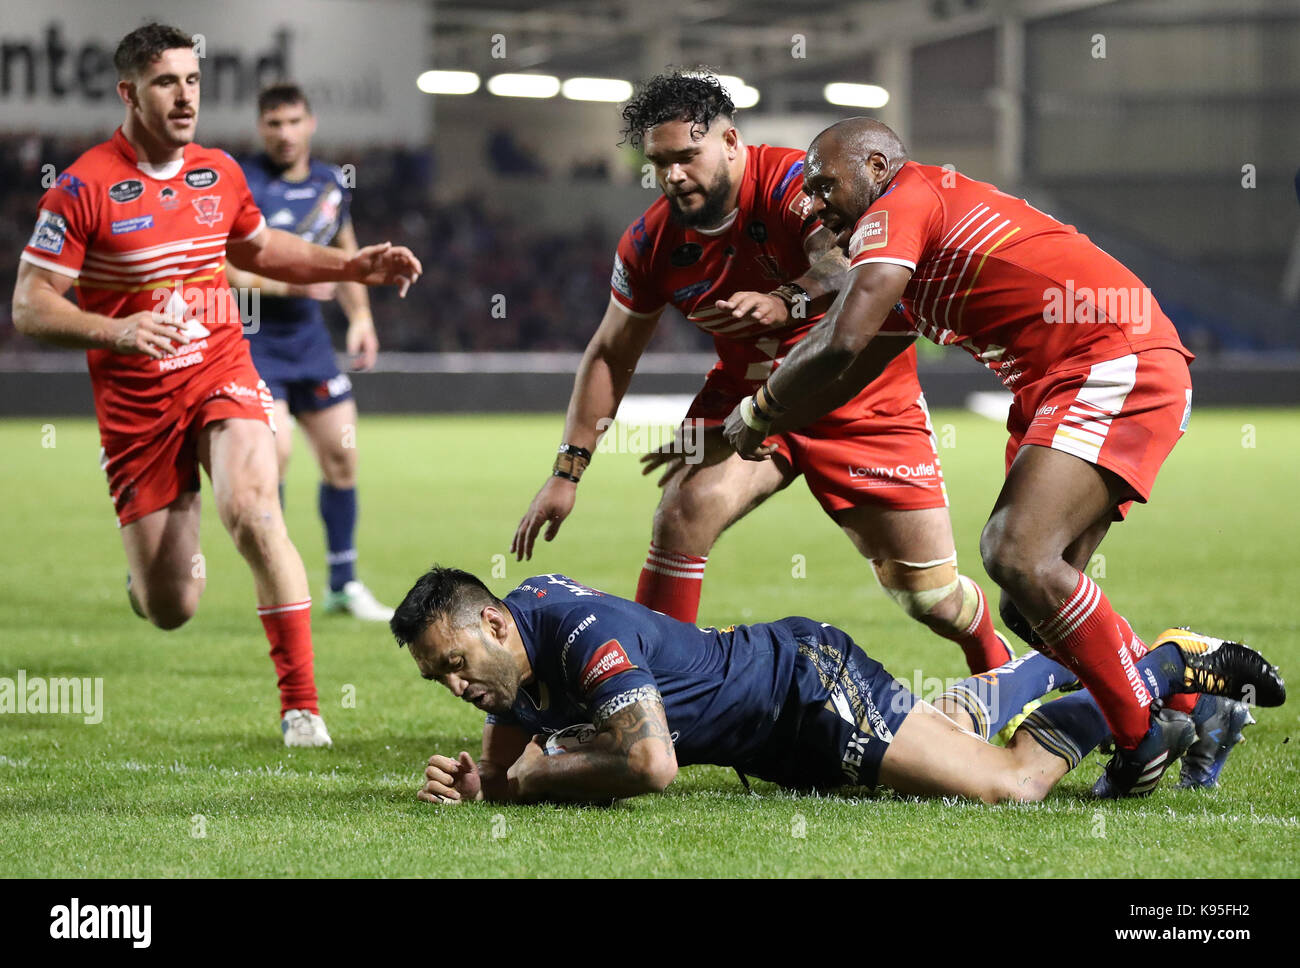 St Helens Zeb Taia goes over for a try past Salford Red Devils' Ben Murdoch-Masila (left) and Rob Lui (right), during the Betfred Super 8s match at the AJ Bell Stadium, Salford. Stock Photo